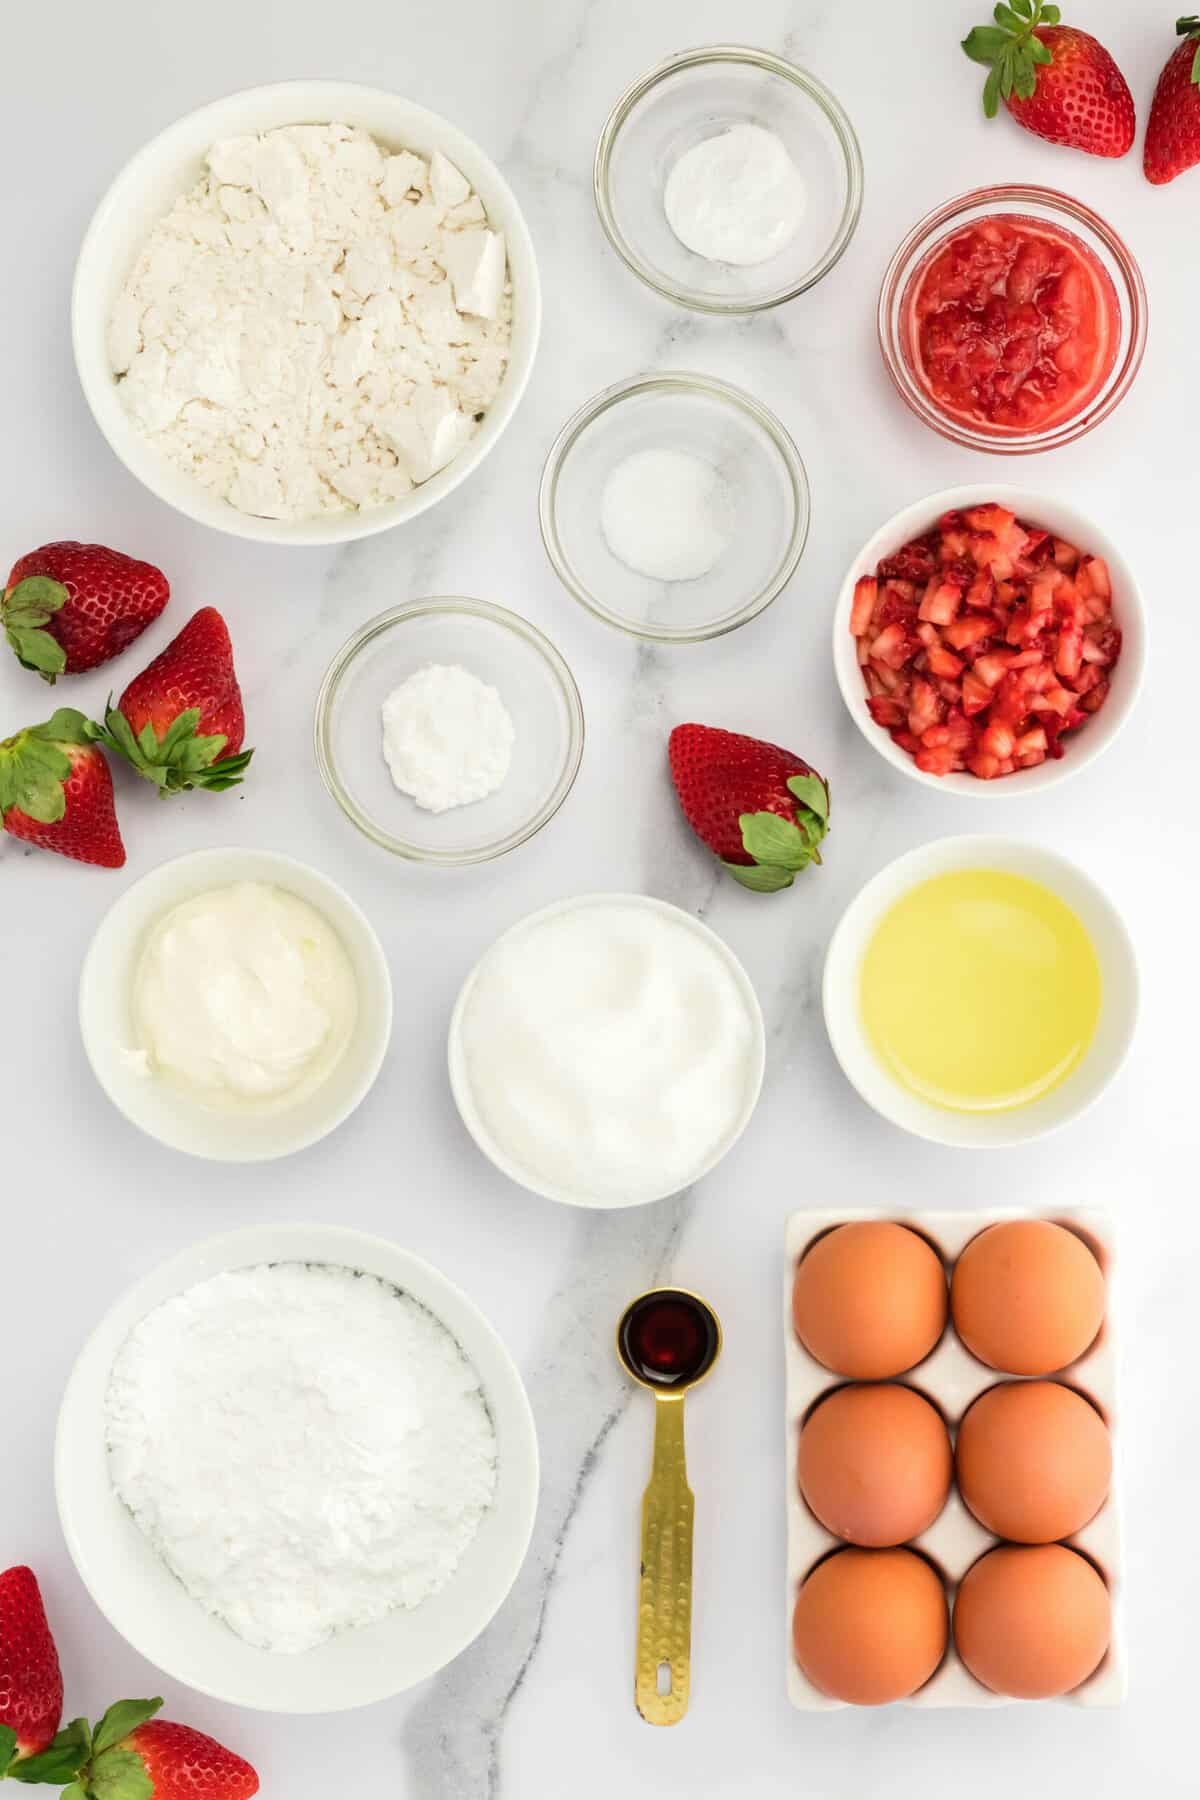 Top view of ingredients needed to make baked strawberry donuts.